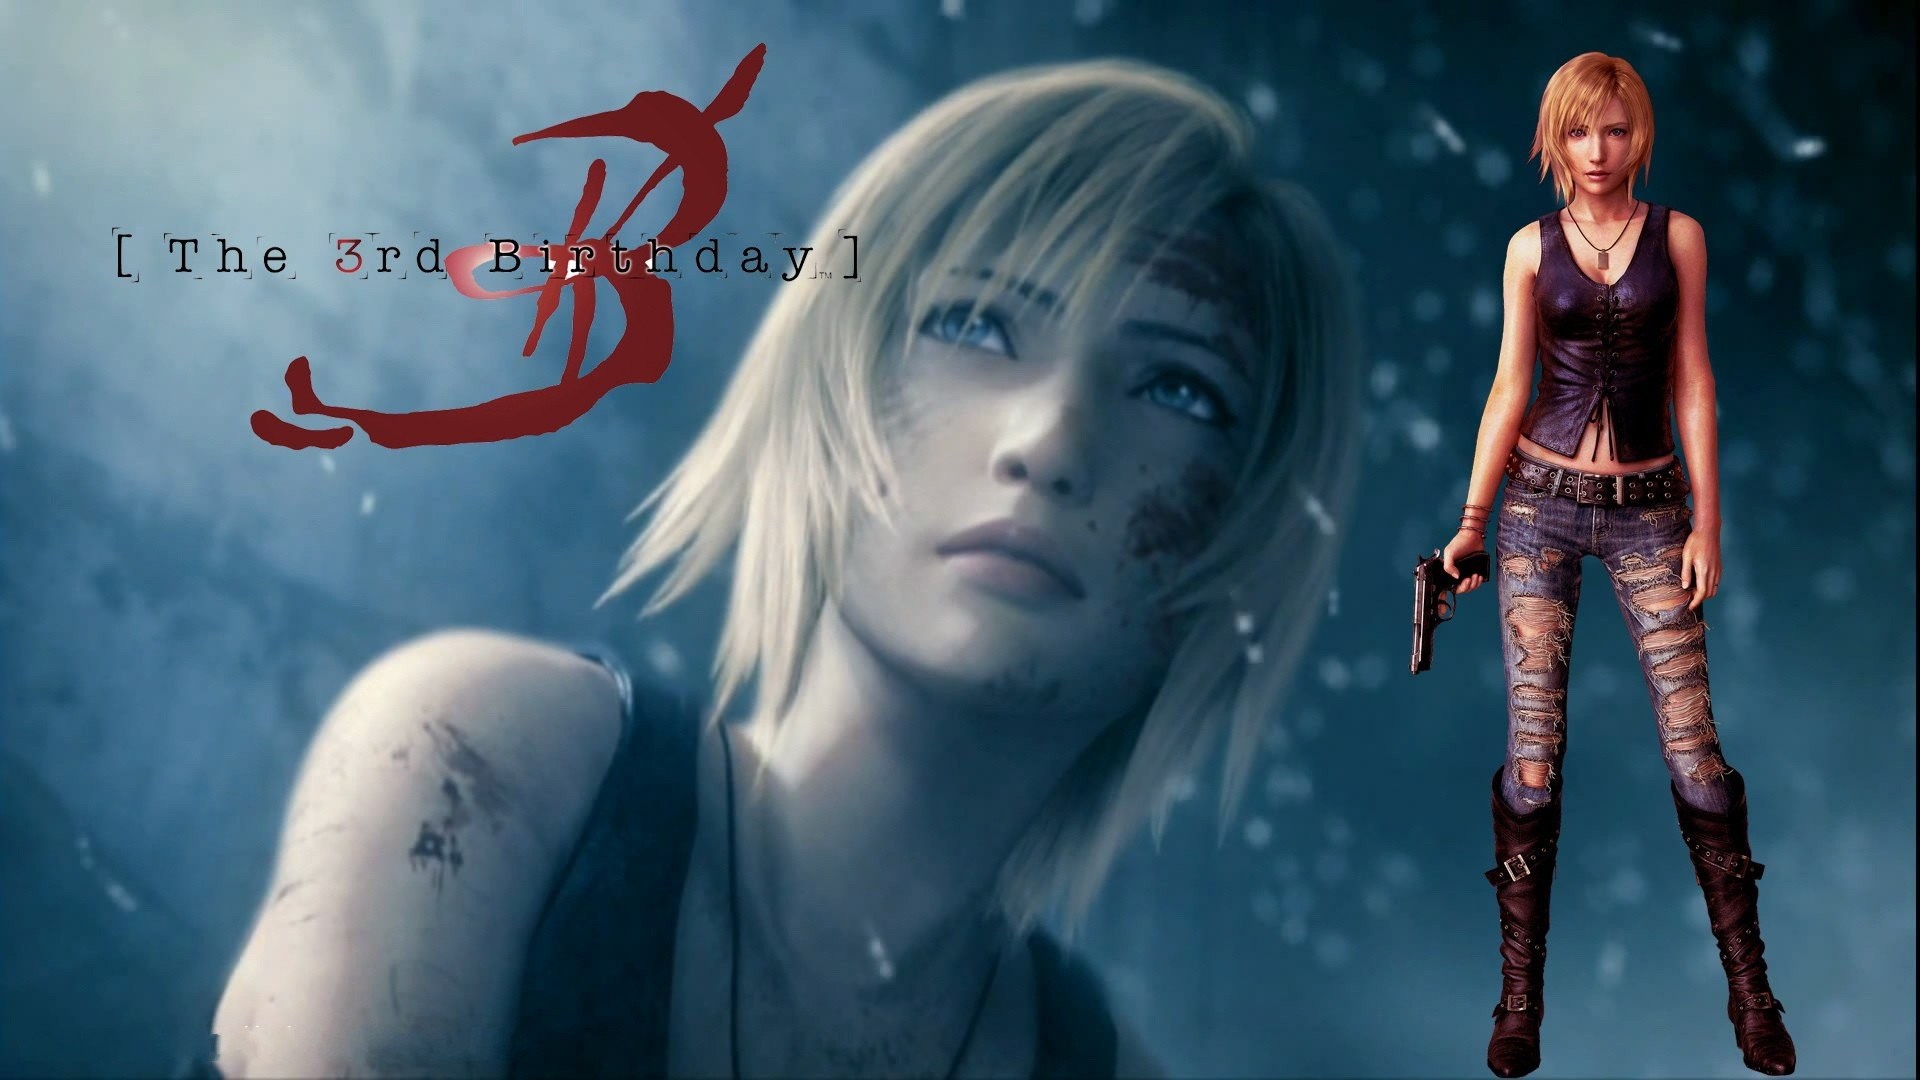 General 1920x1080 The 3rd Birthday Aya Brea anime girls video games Video Game Heroes gun Parasite Eve video game art video game girls girls with guns standing necklace weapon torn clothes blonde